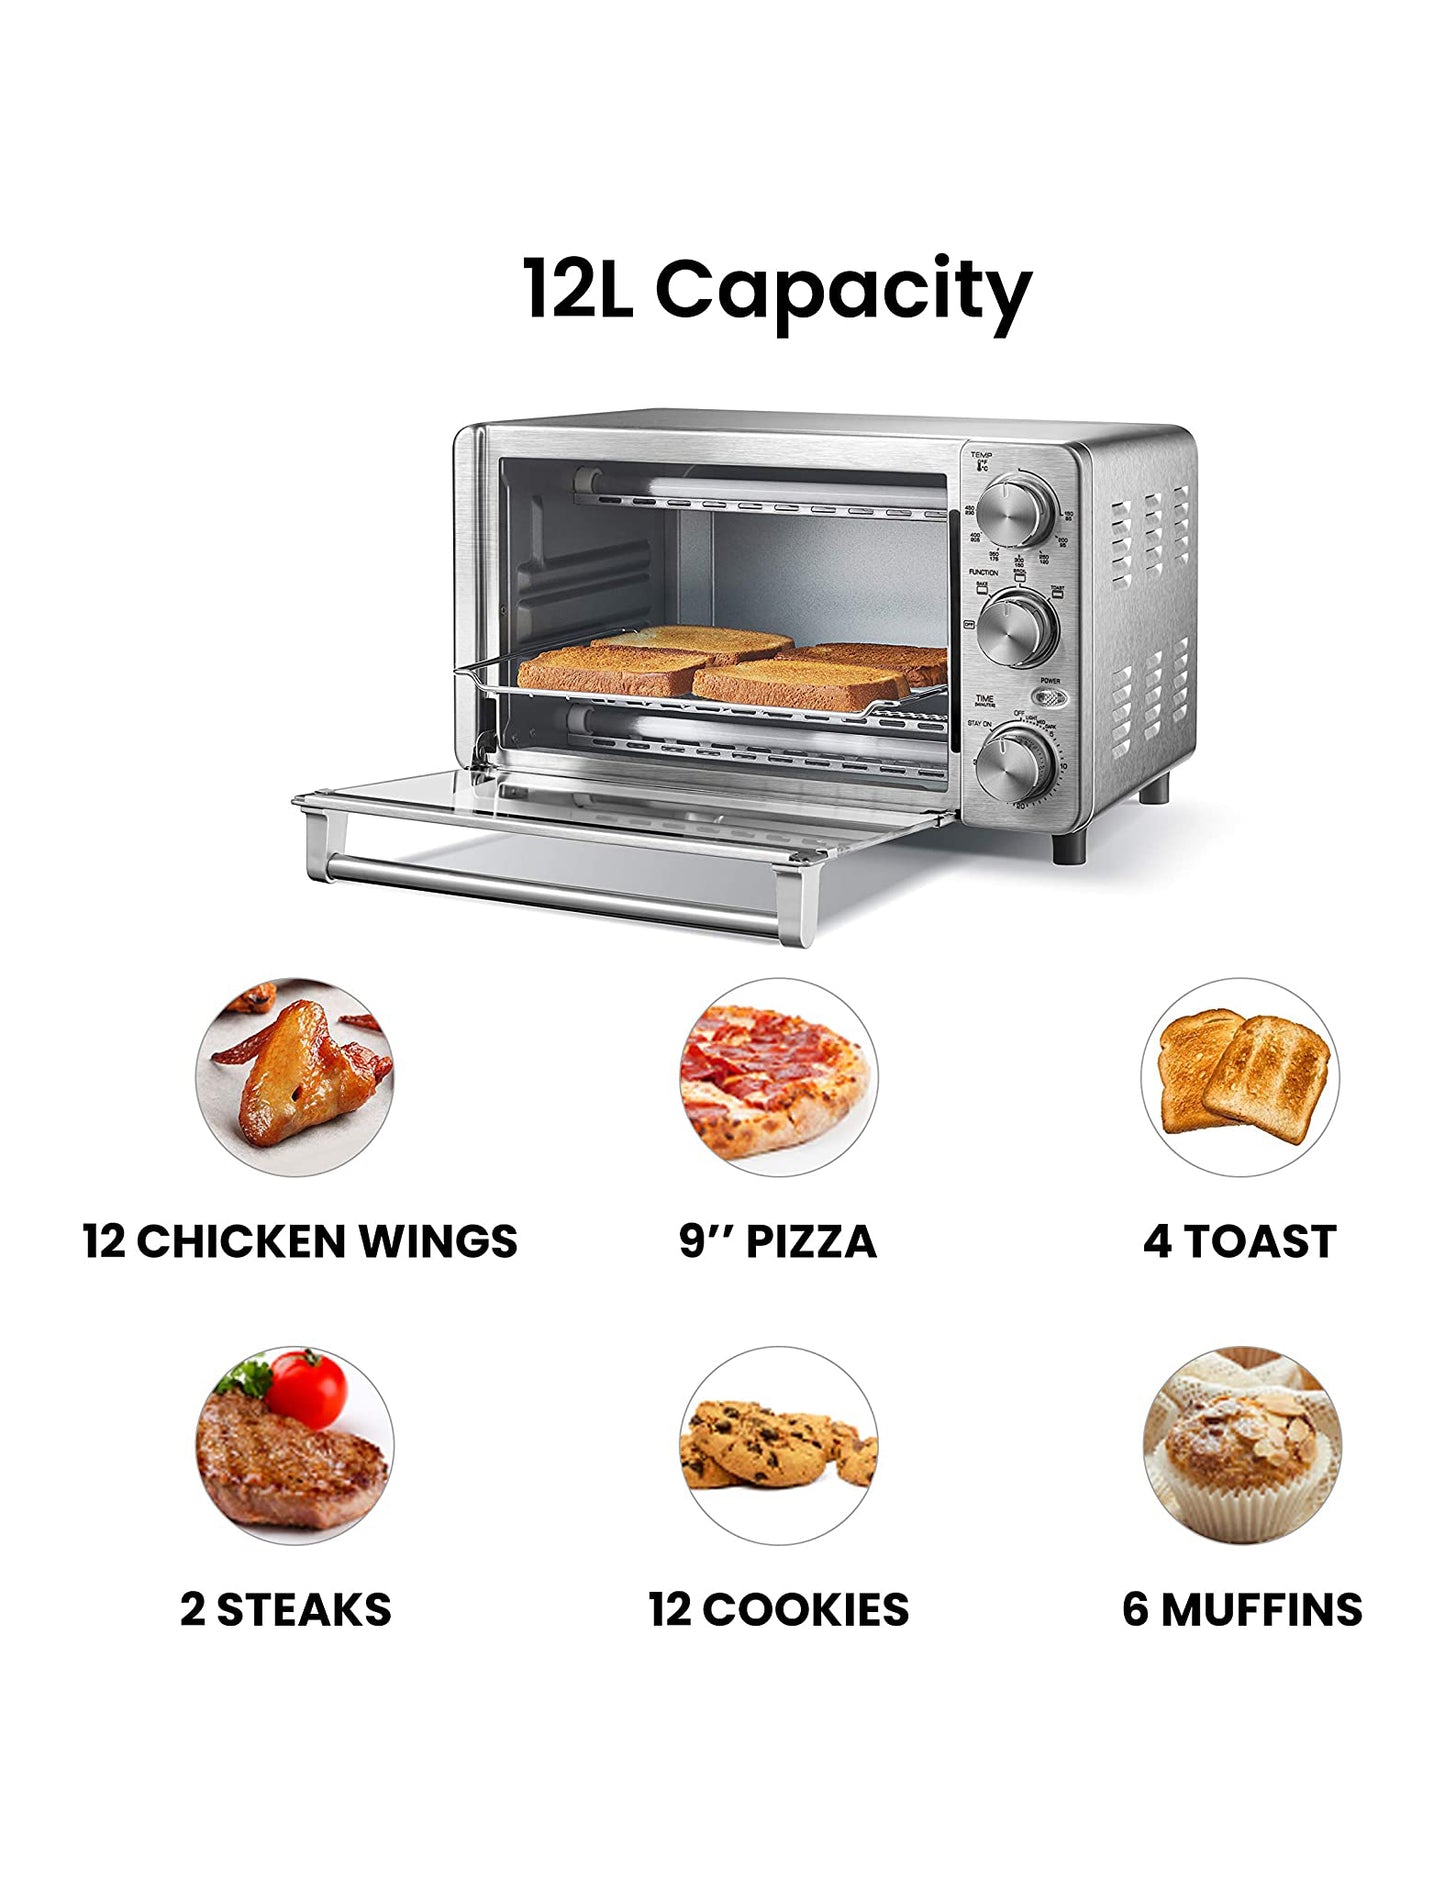 open toaster oven with toast inside